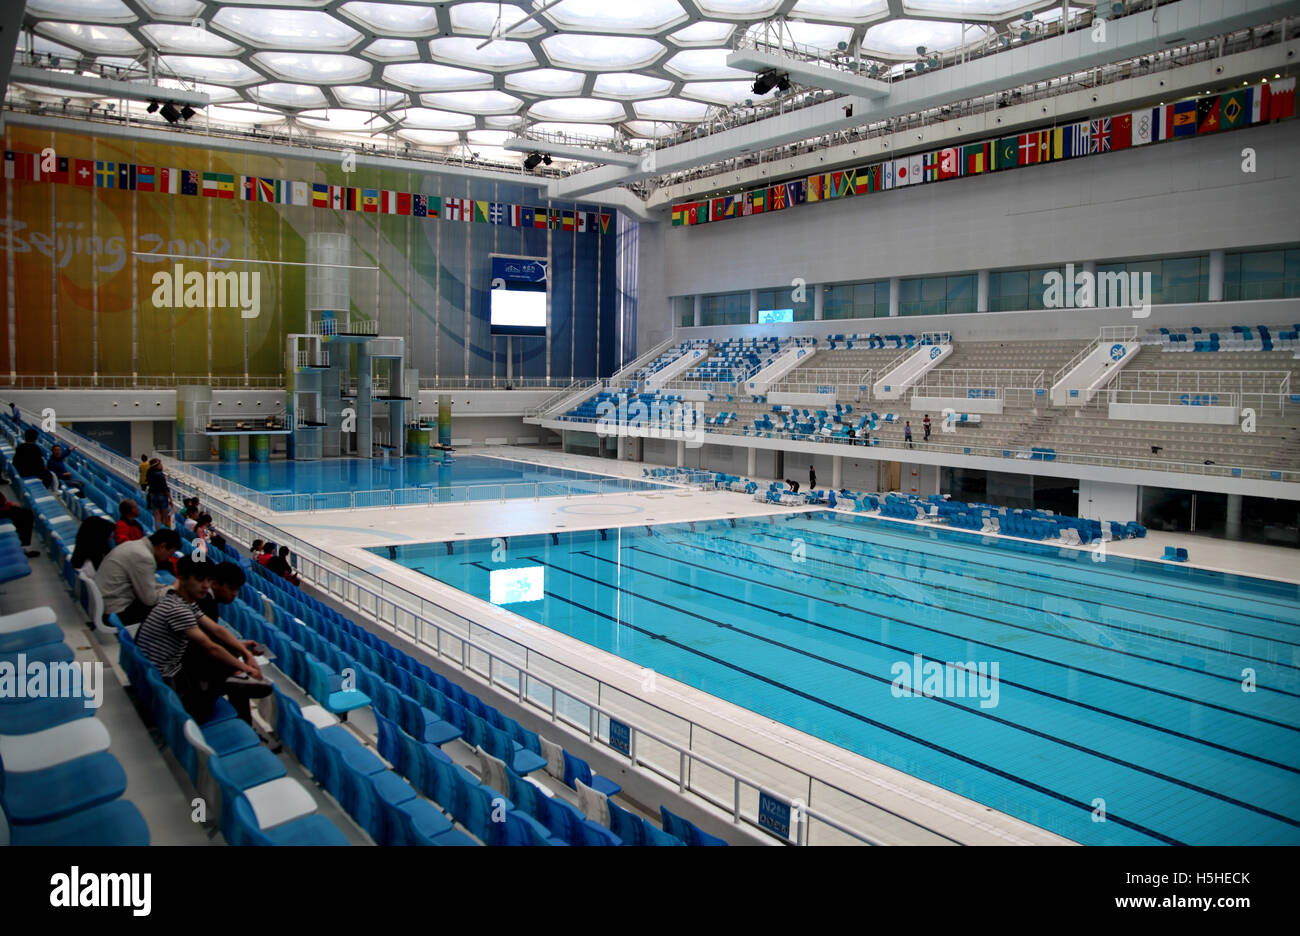 The pool in the Beijing National Aquatics Center, built and designed for the 2008 Beijing Olympics by a consortium. Stock Photo